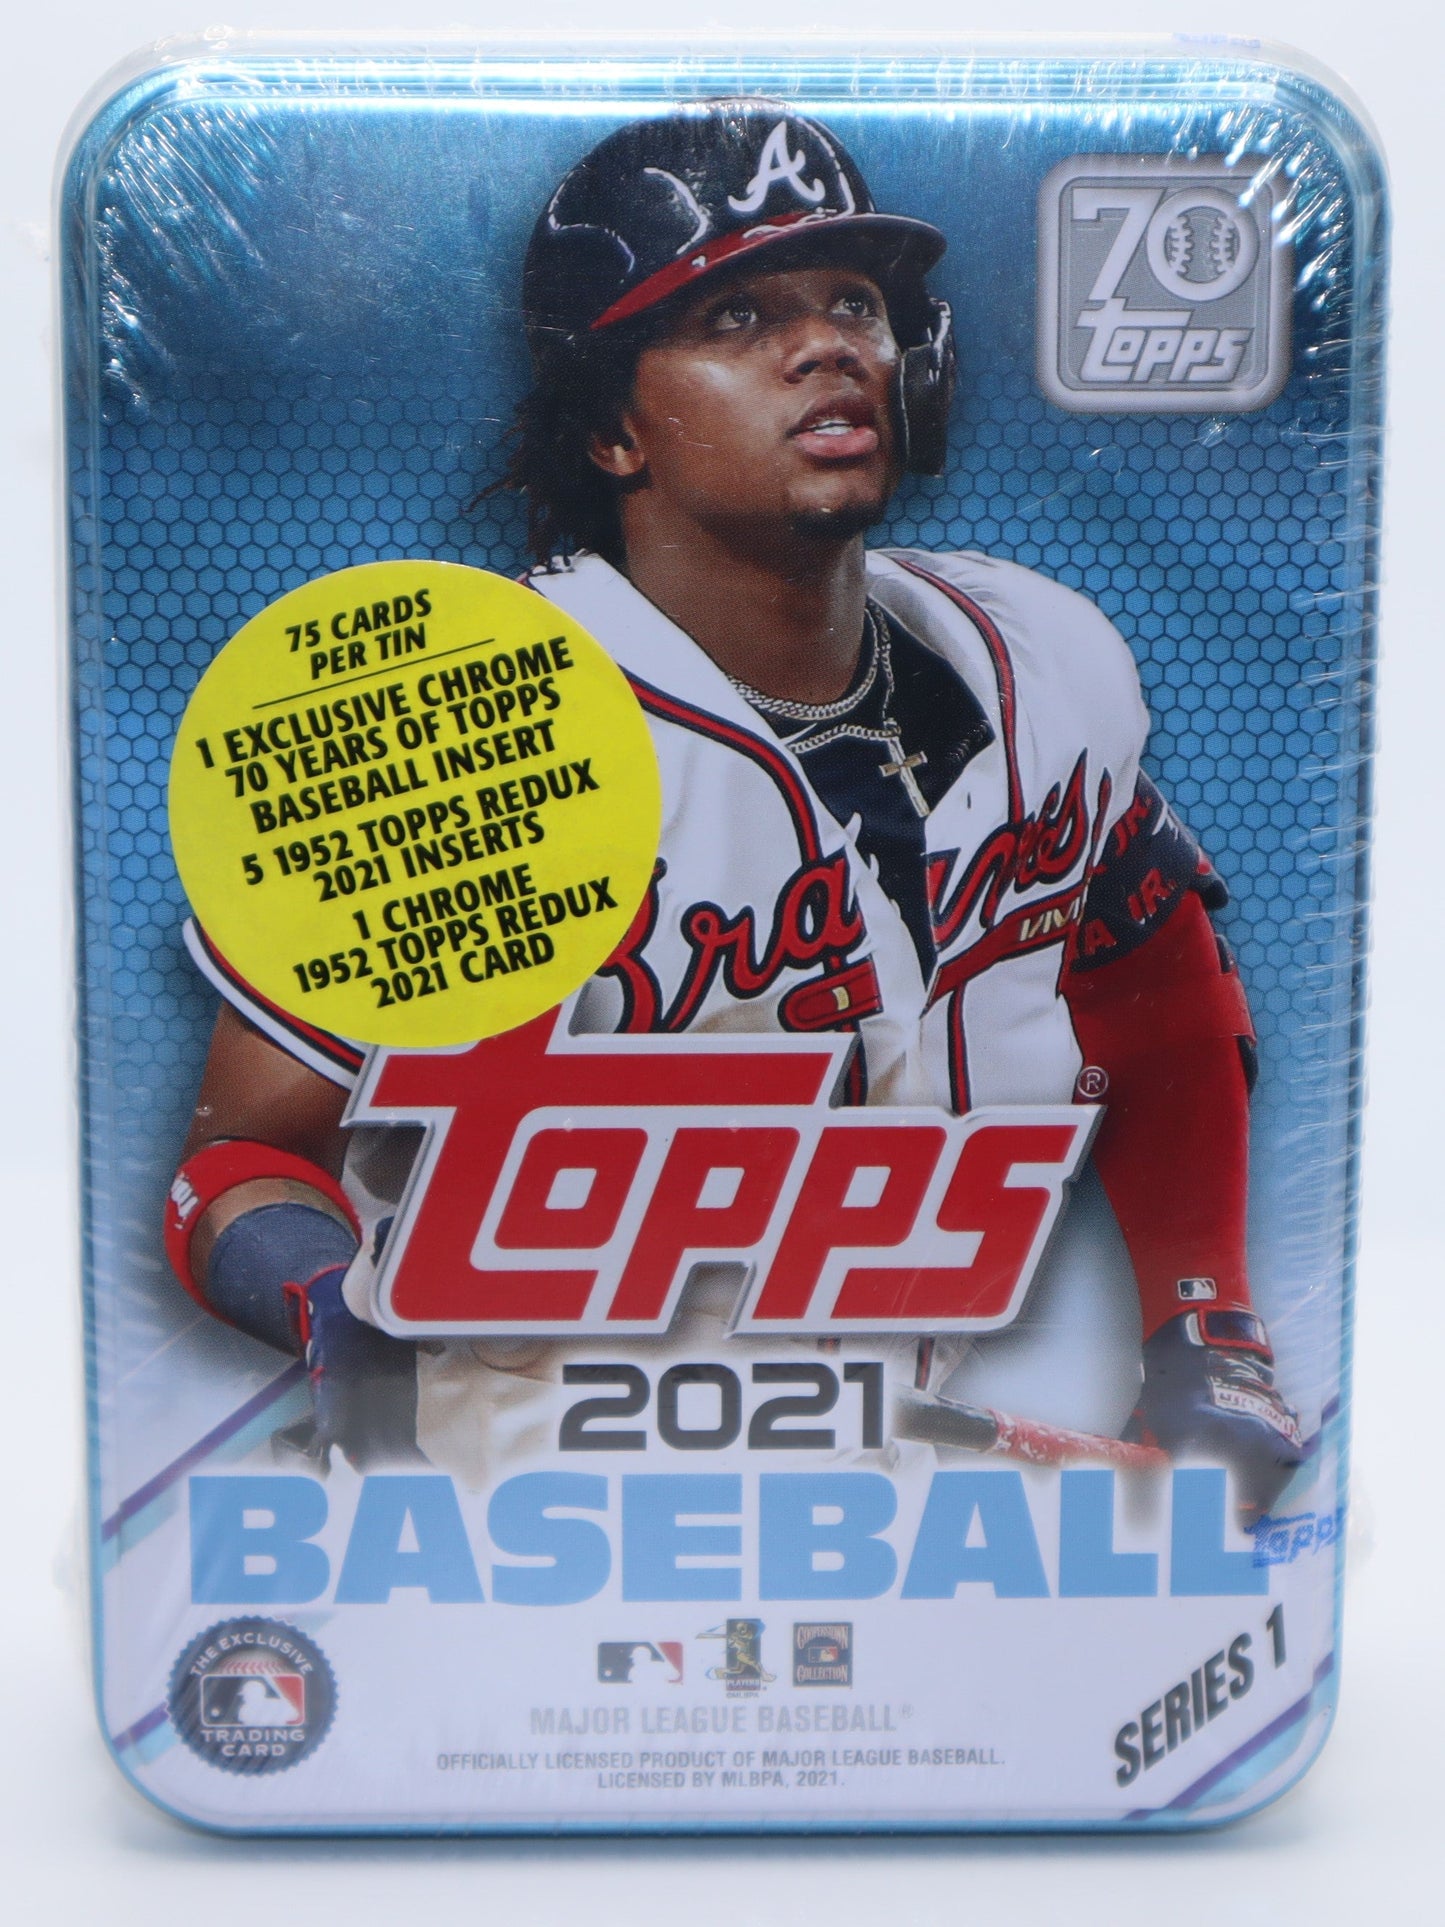 2021 Topps Series 1 Baseball Cards Tin Pack - Collectibles